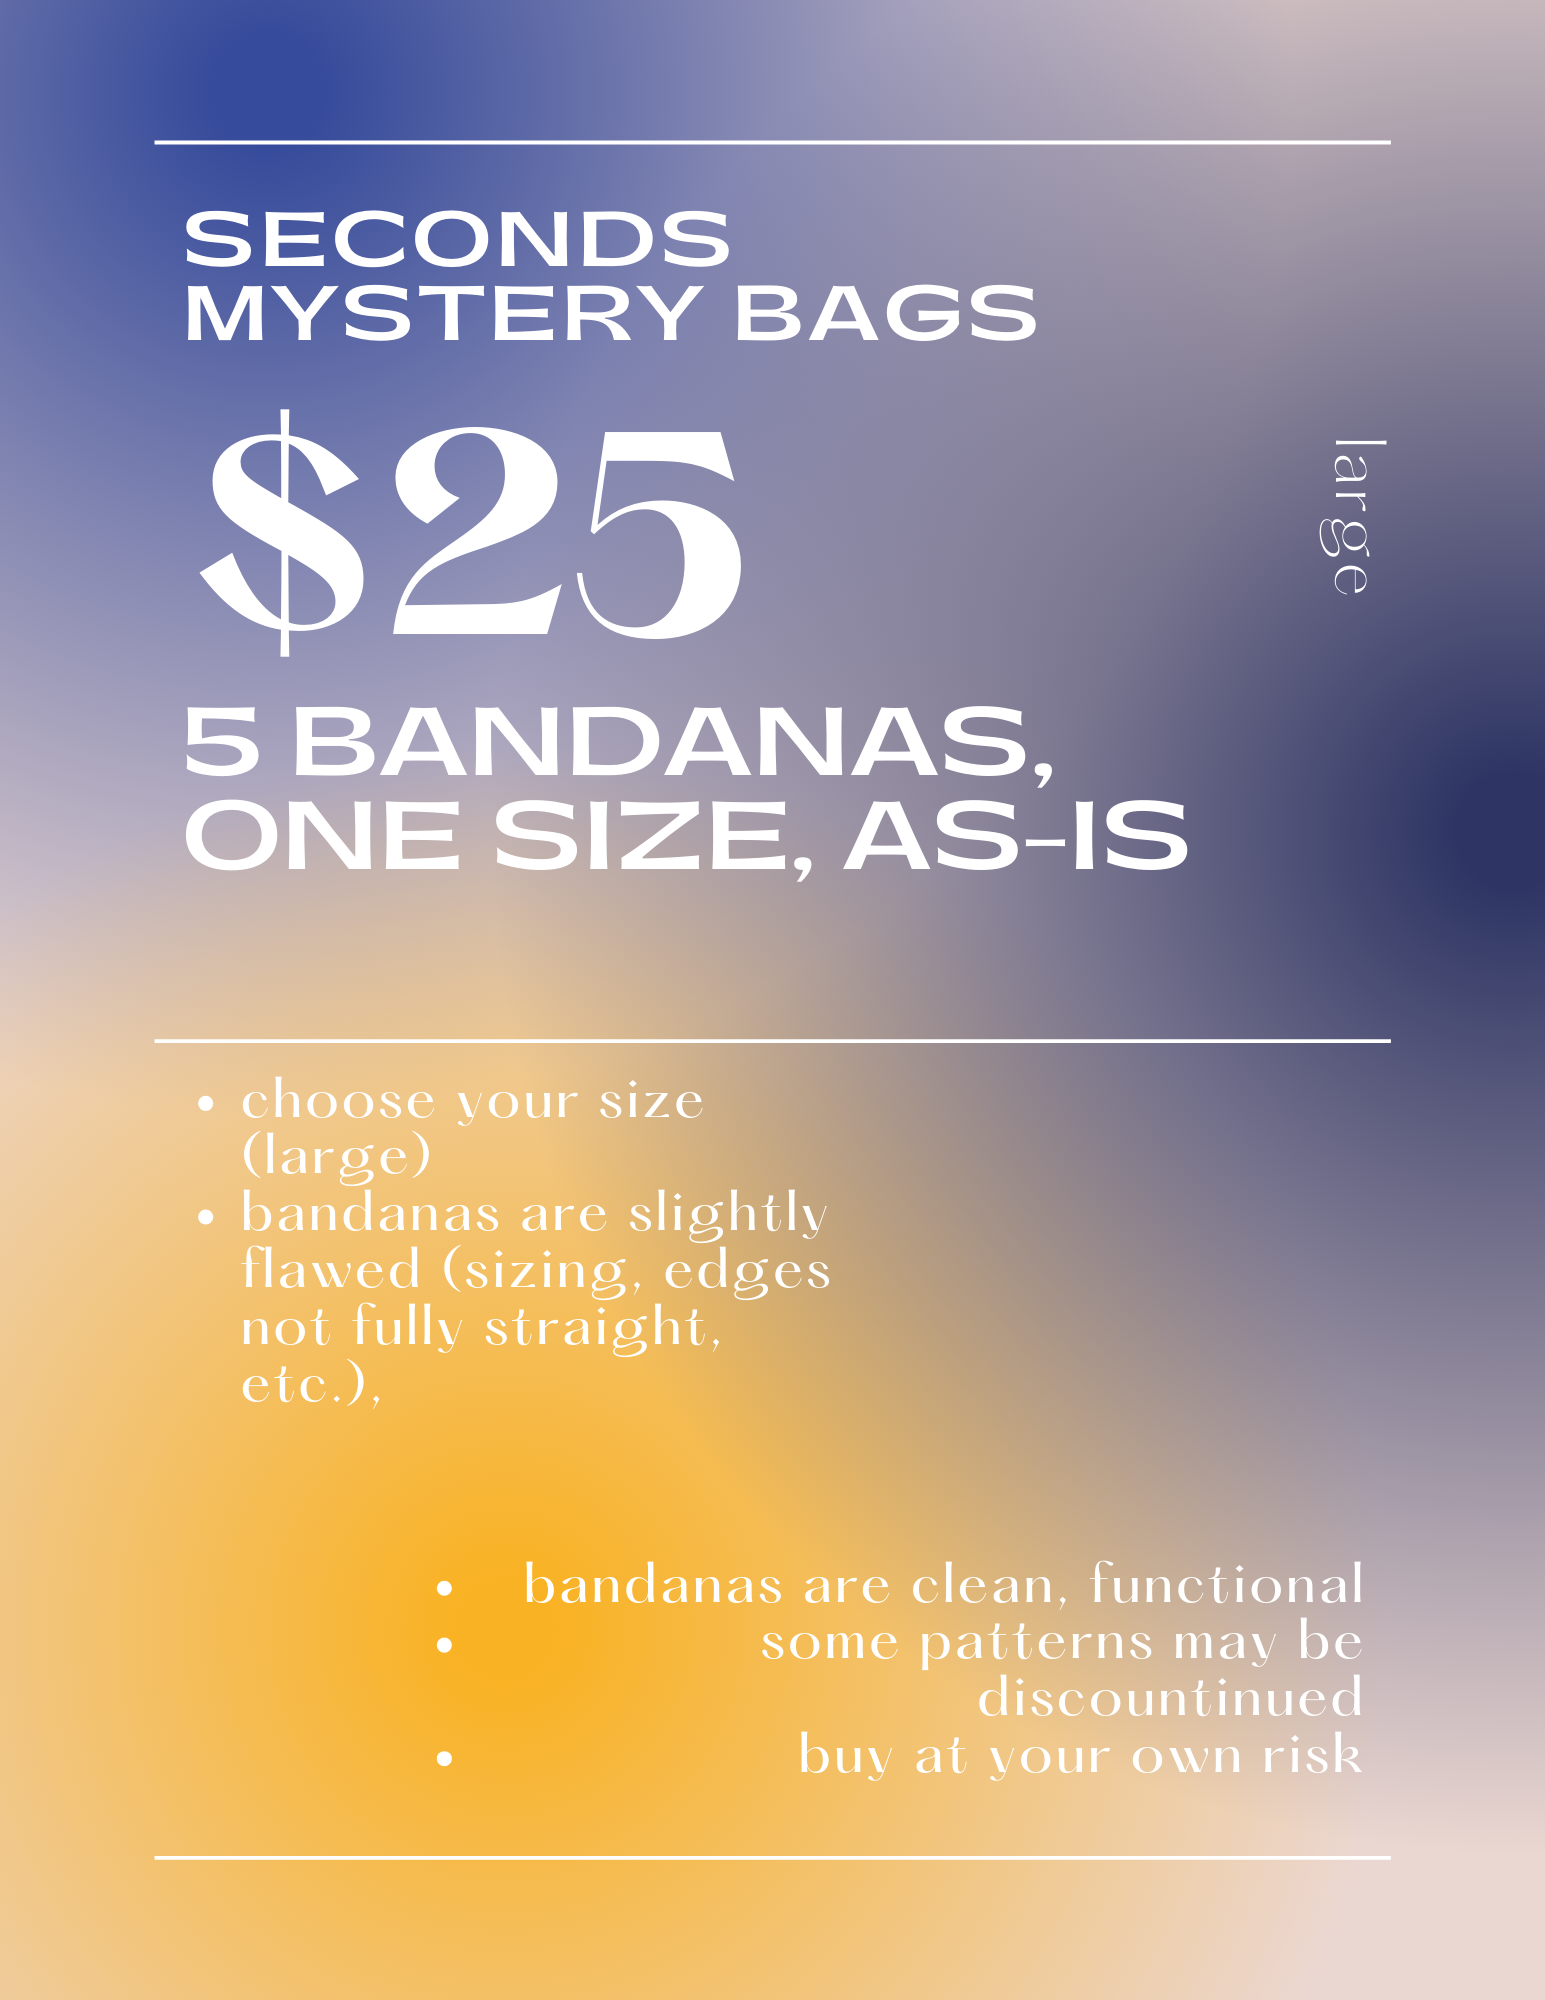 Large SECONDS MYSTERY BAGS